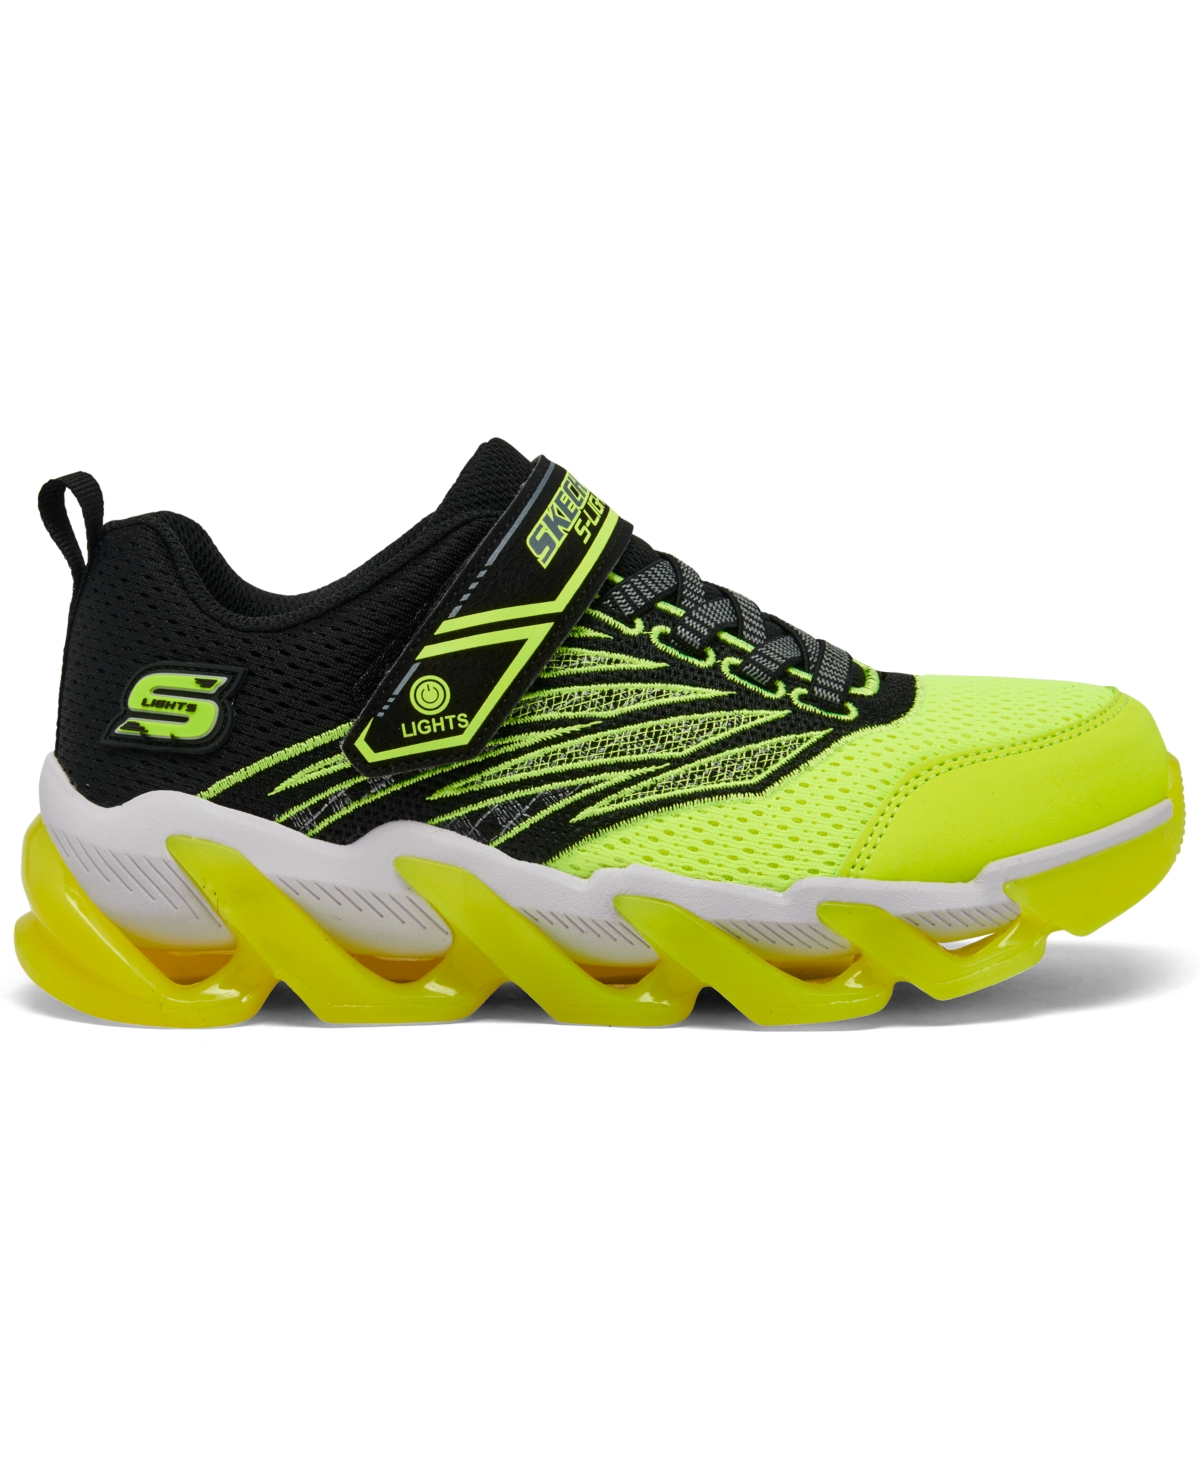 Shop Skechers Little Boys' S Lights: Mega Surge Stay-put Closure Light-up Casual Athletic Sneakers From Finish Lin In Black,yellow